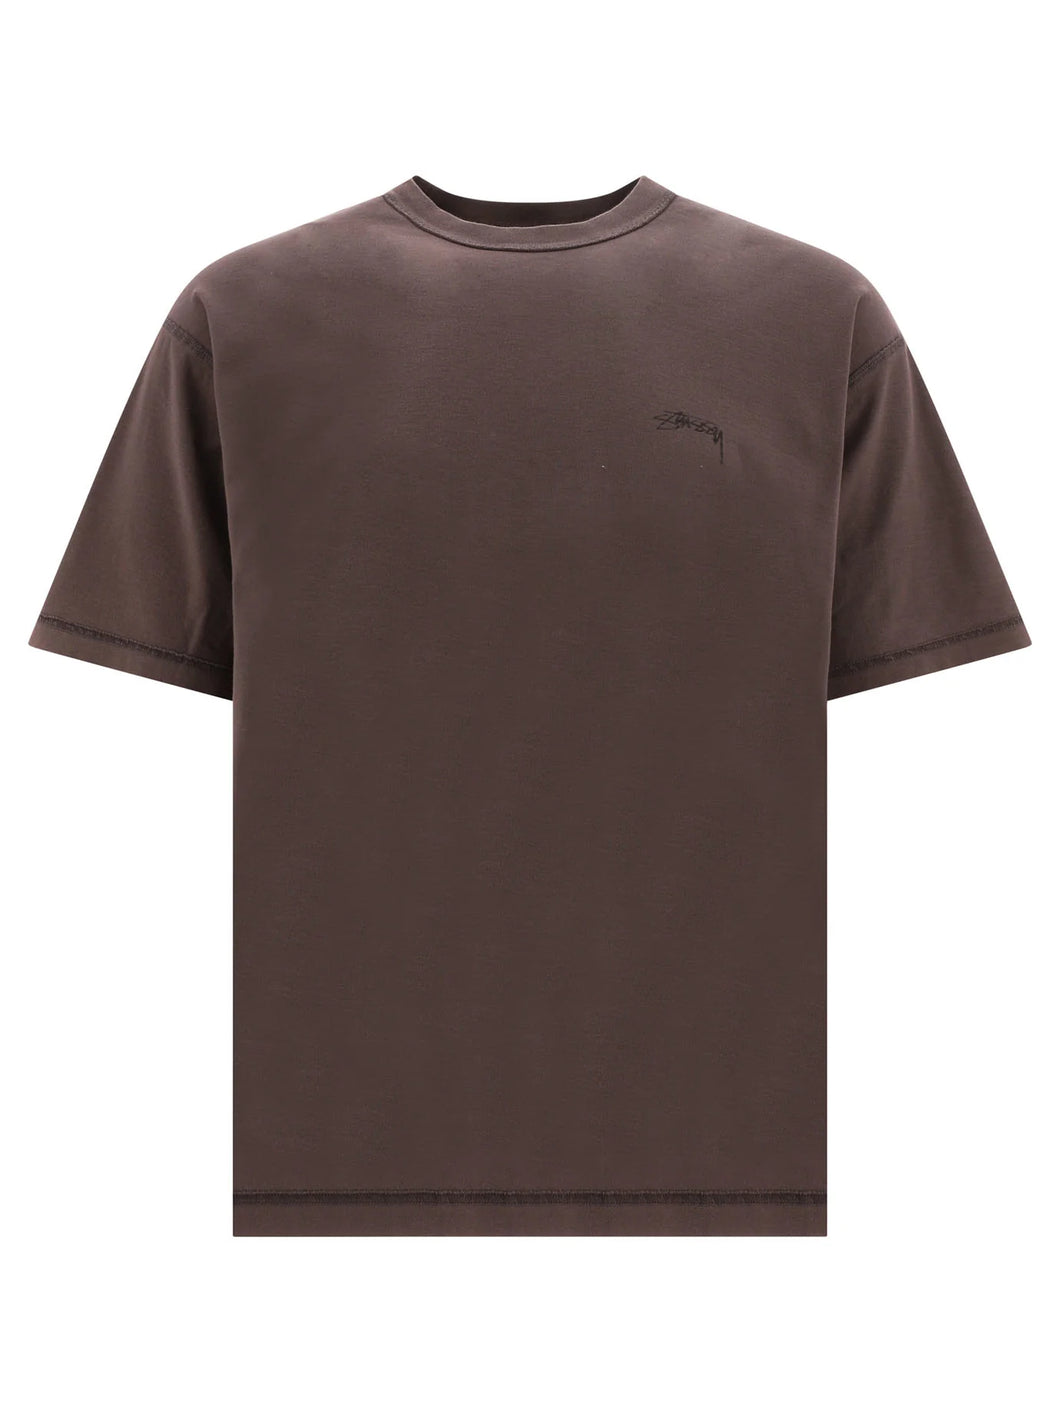 Stüssy Inside Out Tee Brown